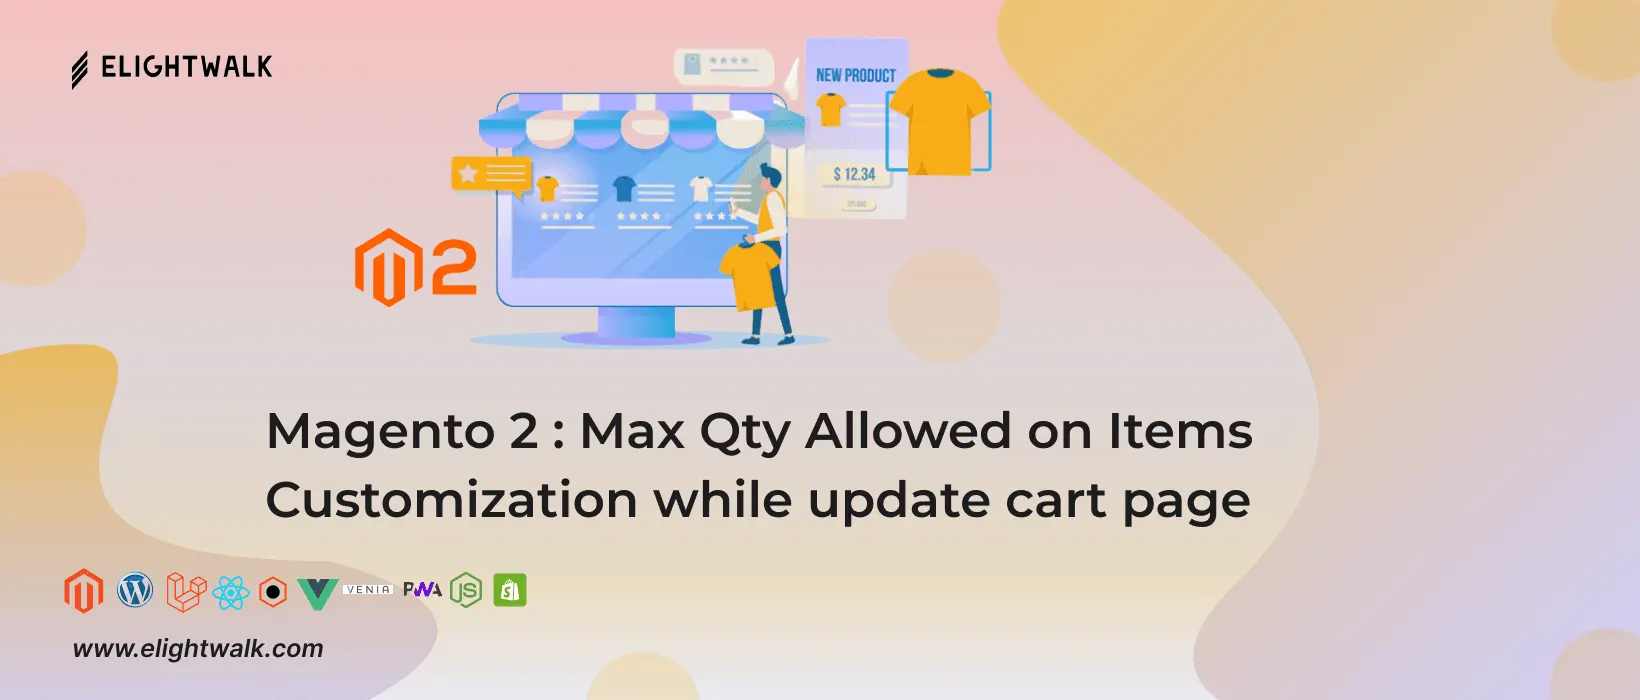 Magento 2 : Max Qty Allowed on Items Customization while update cart page